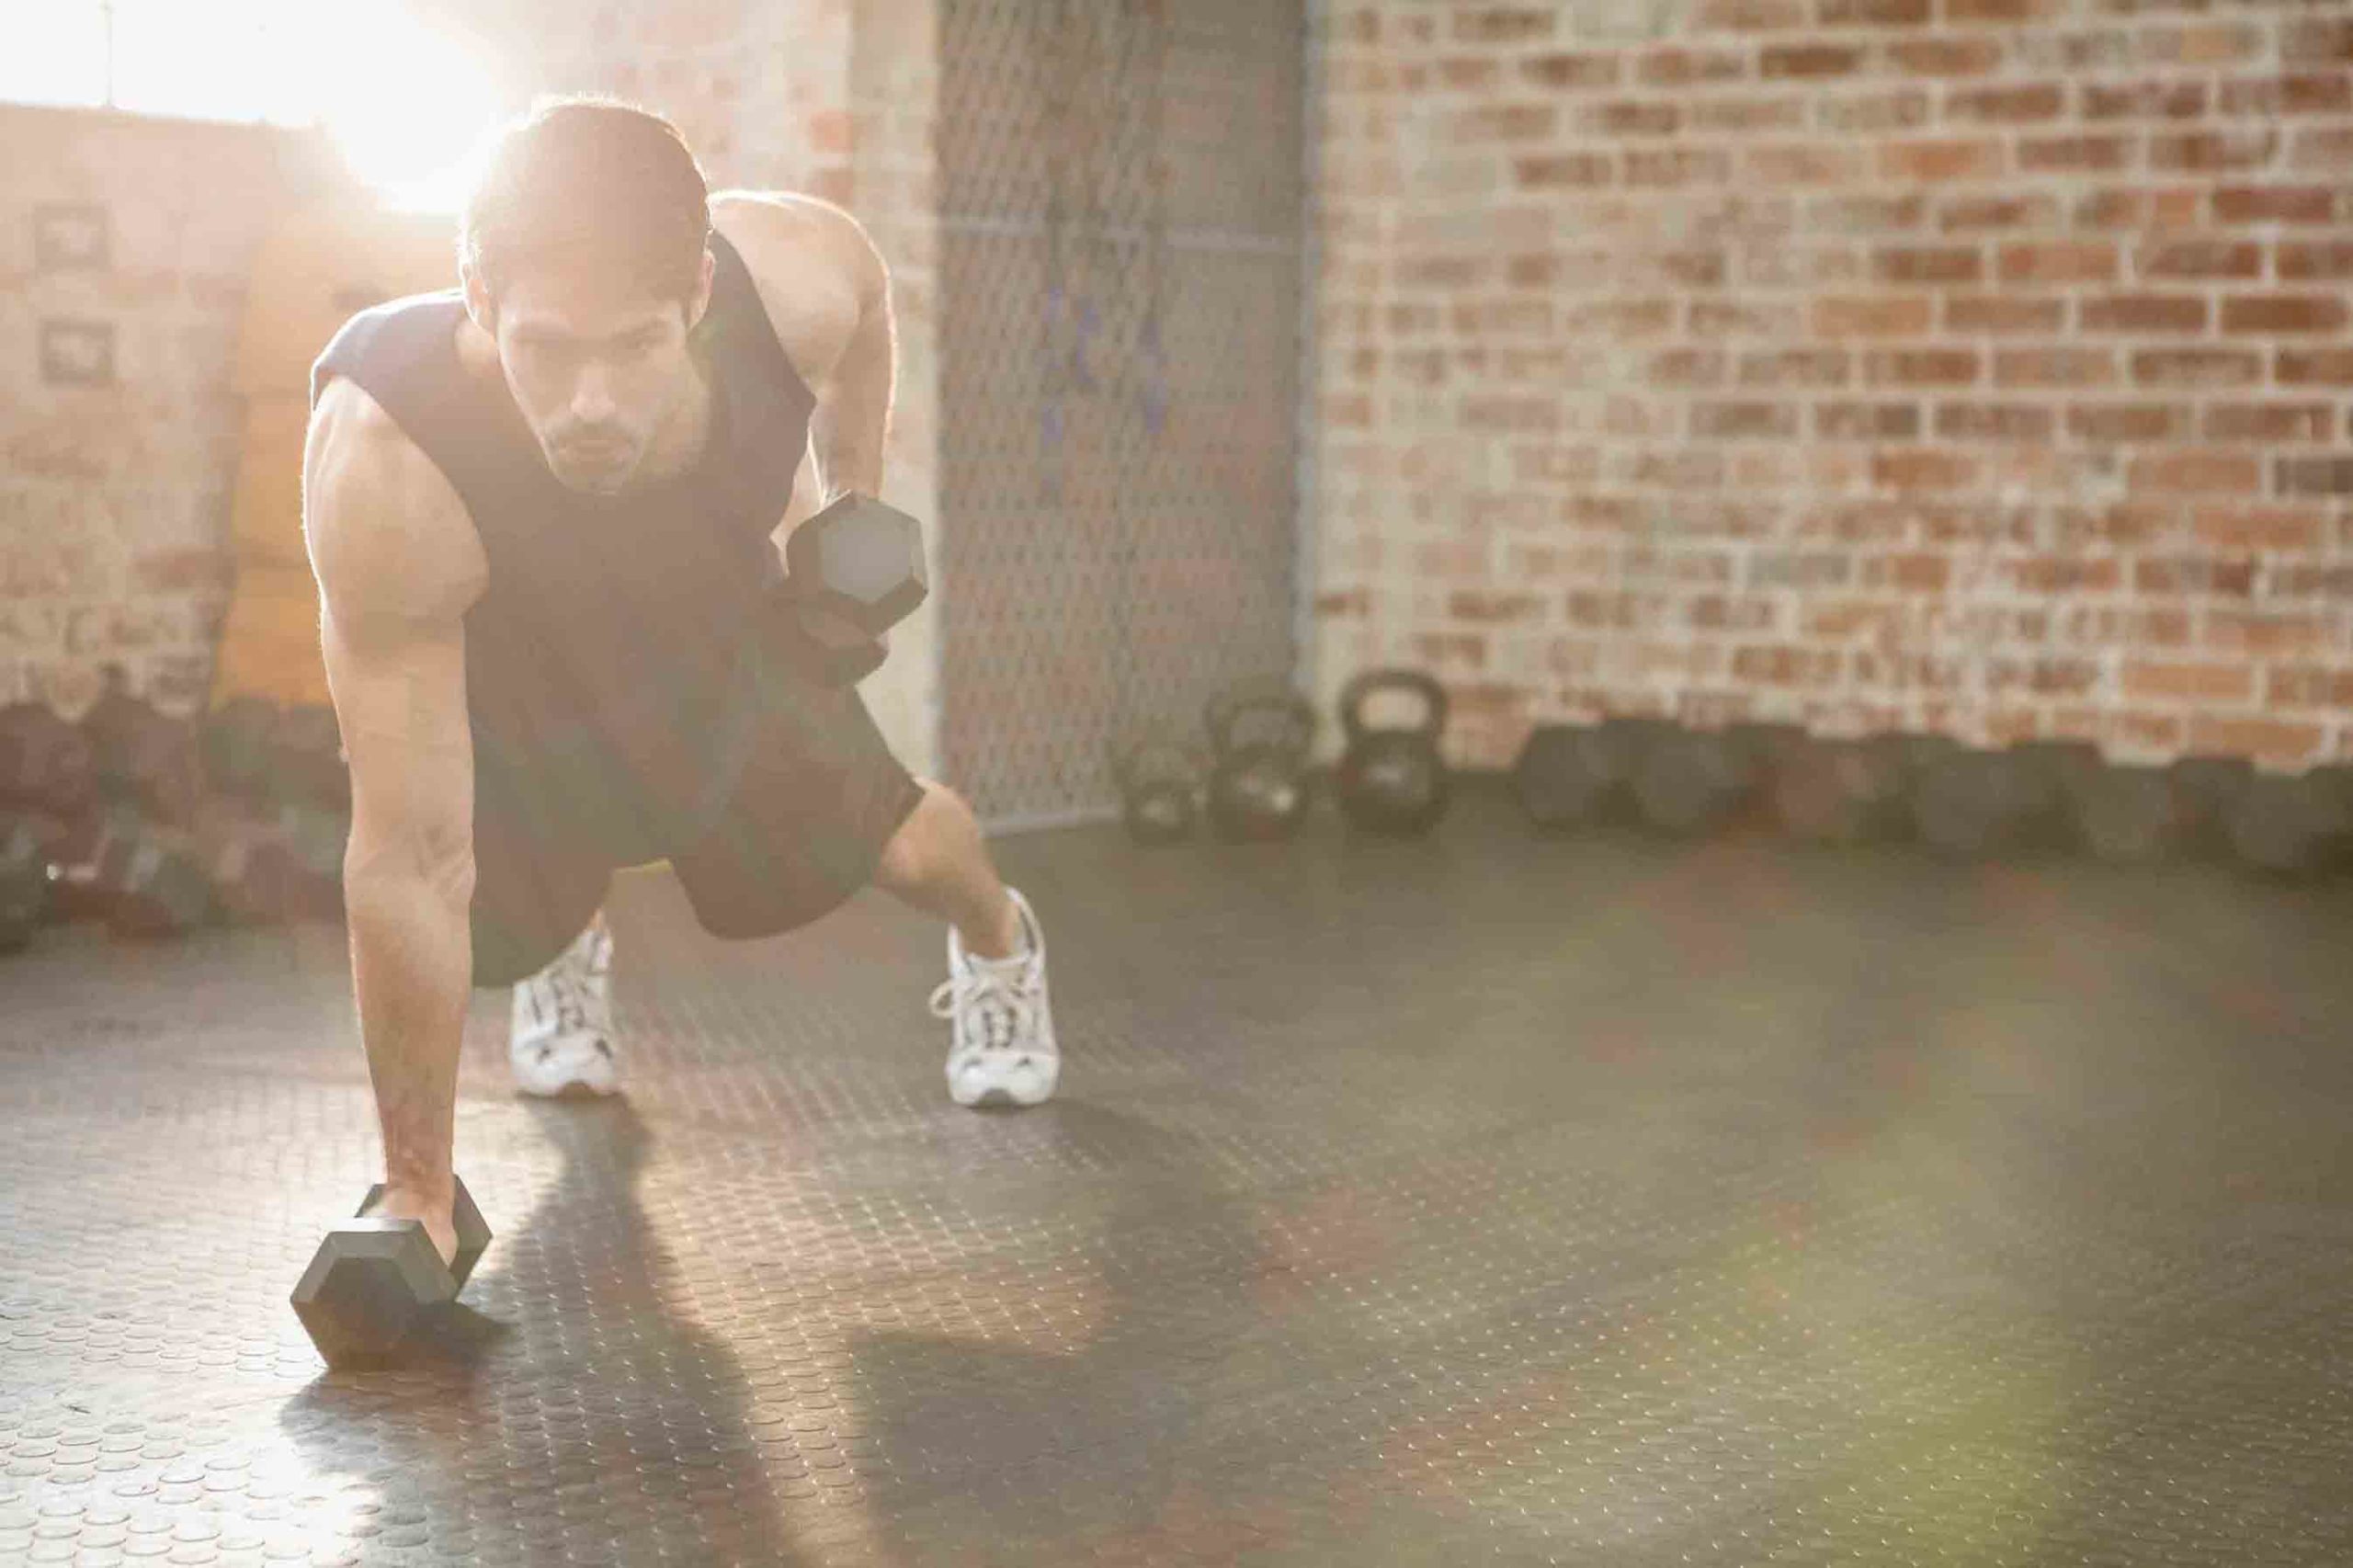 Build a broader and stronger chest with the cable crossover